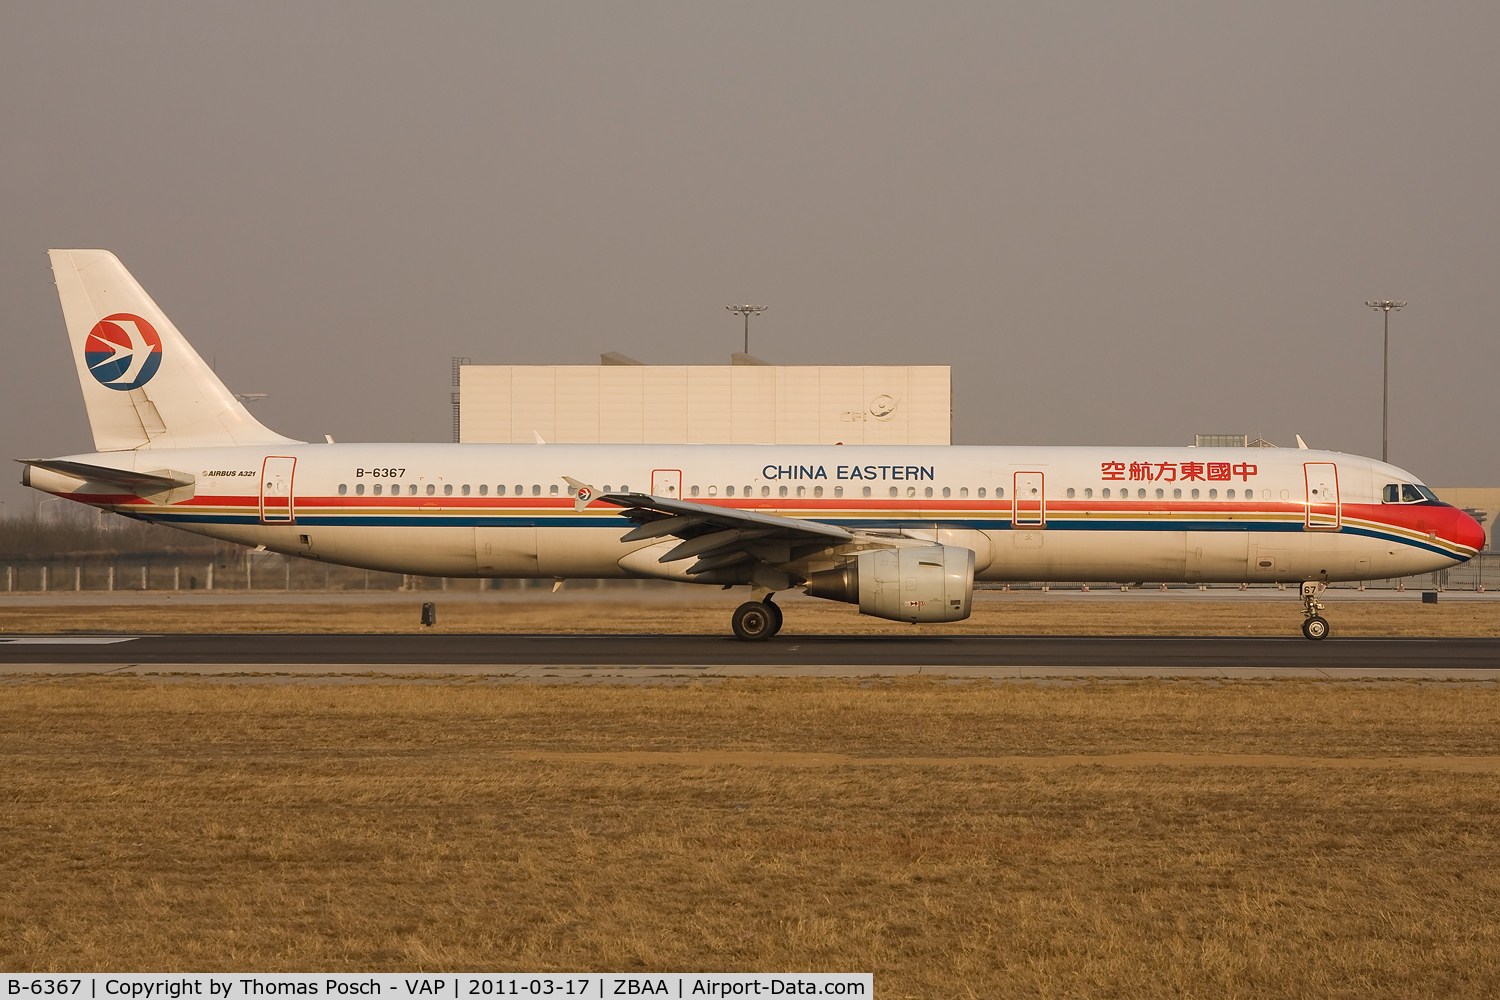 B-6367, 2008 Airbus A321-211 C/N 3612, China Eastern Airlines